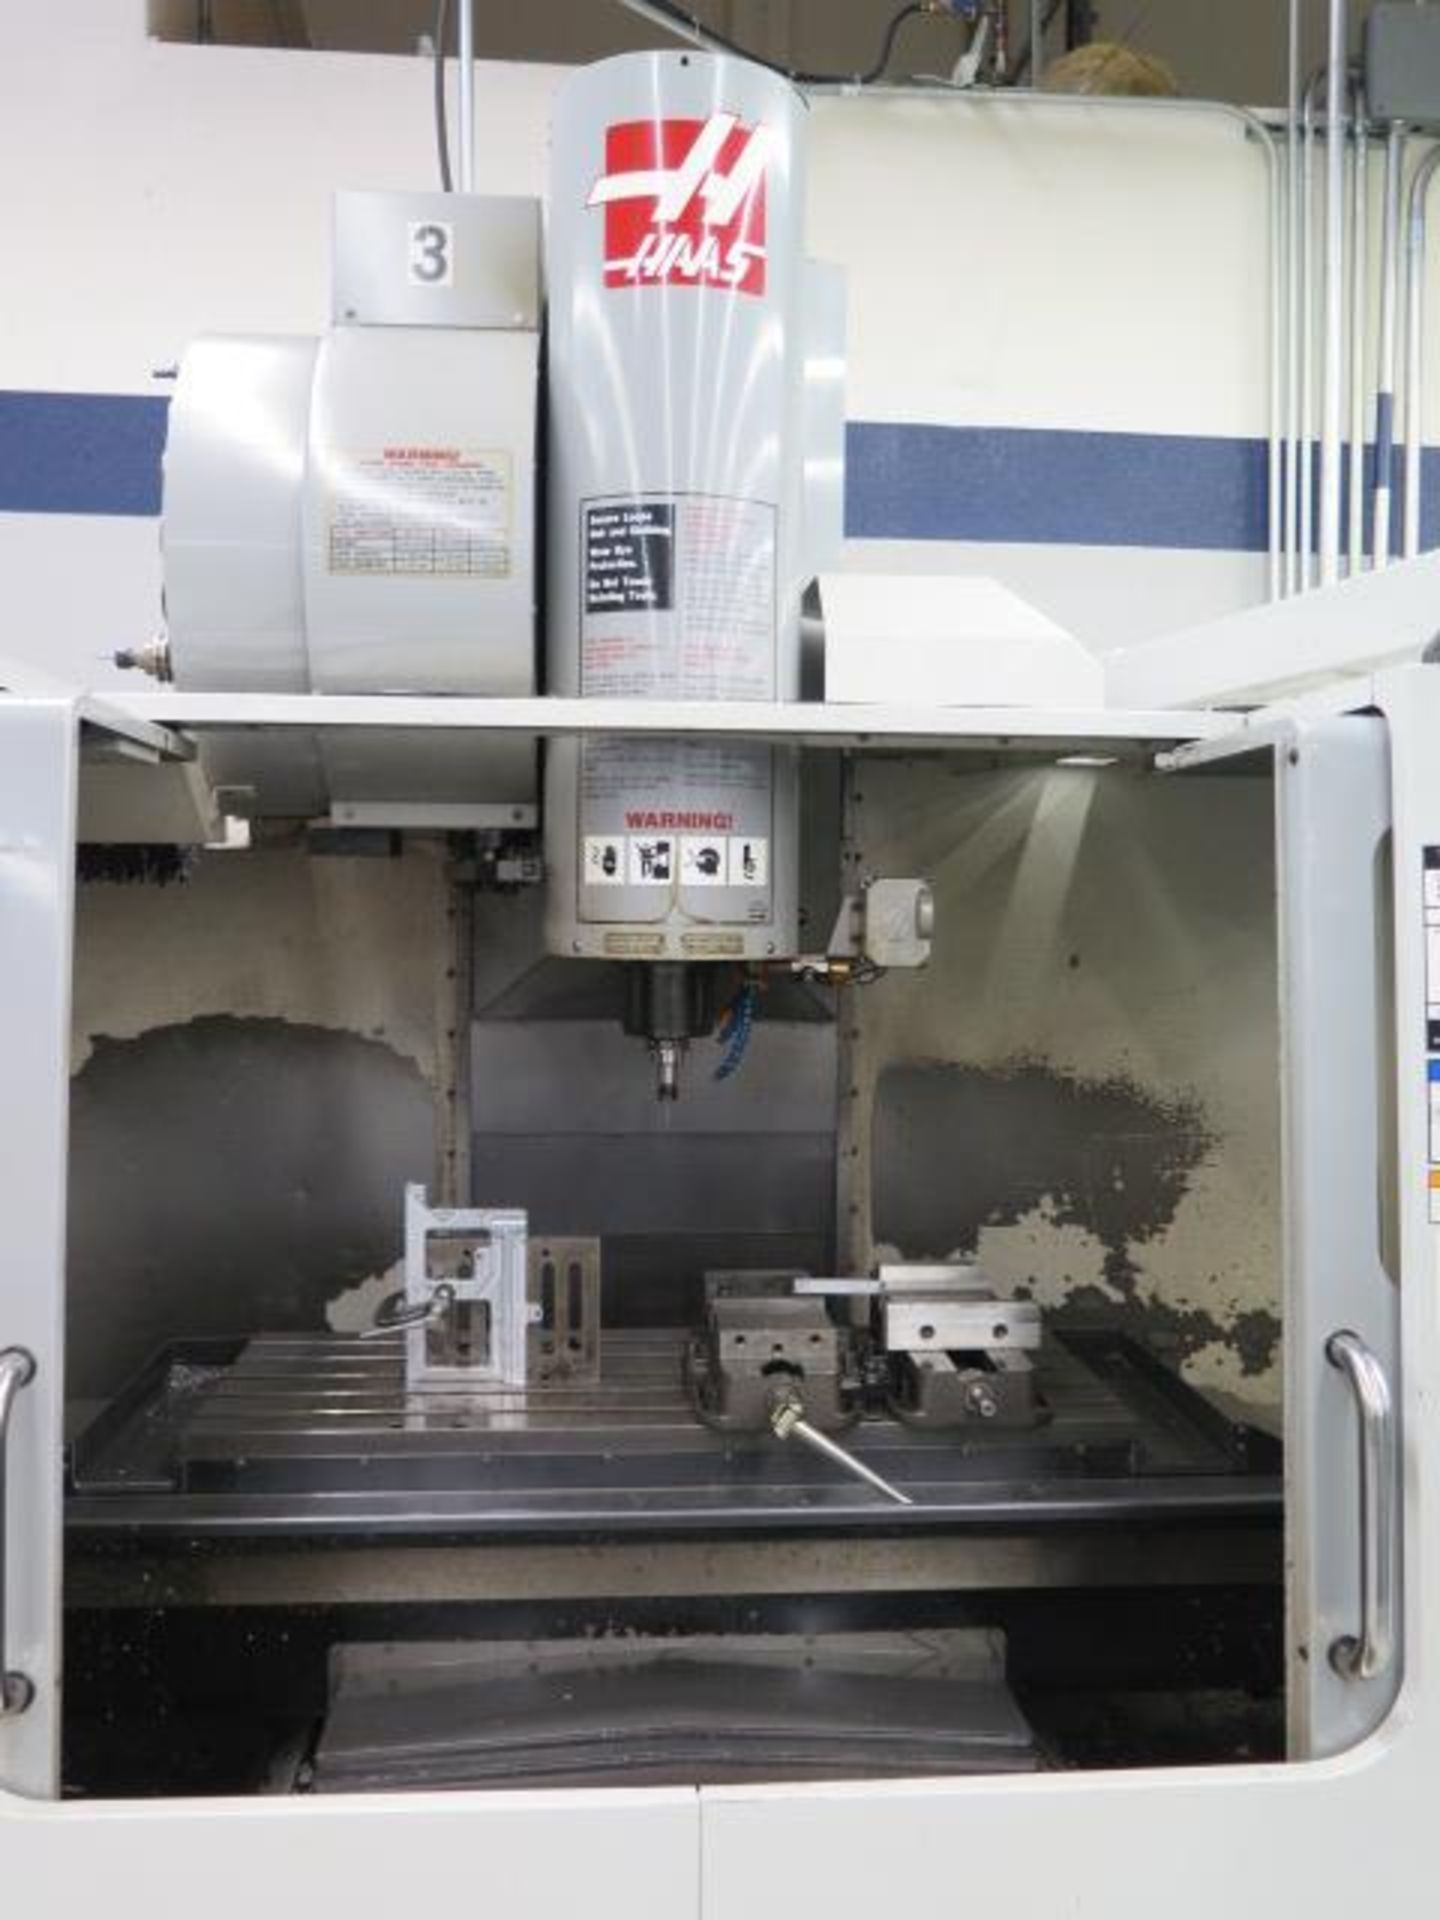 2007 Haas Super VF-3SS CNC VMC s/n 1055001 w/ Haas Controls, Hand Wheel, SOLD AS IS - Image 4 of 17